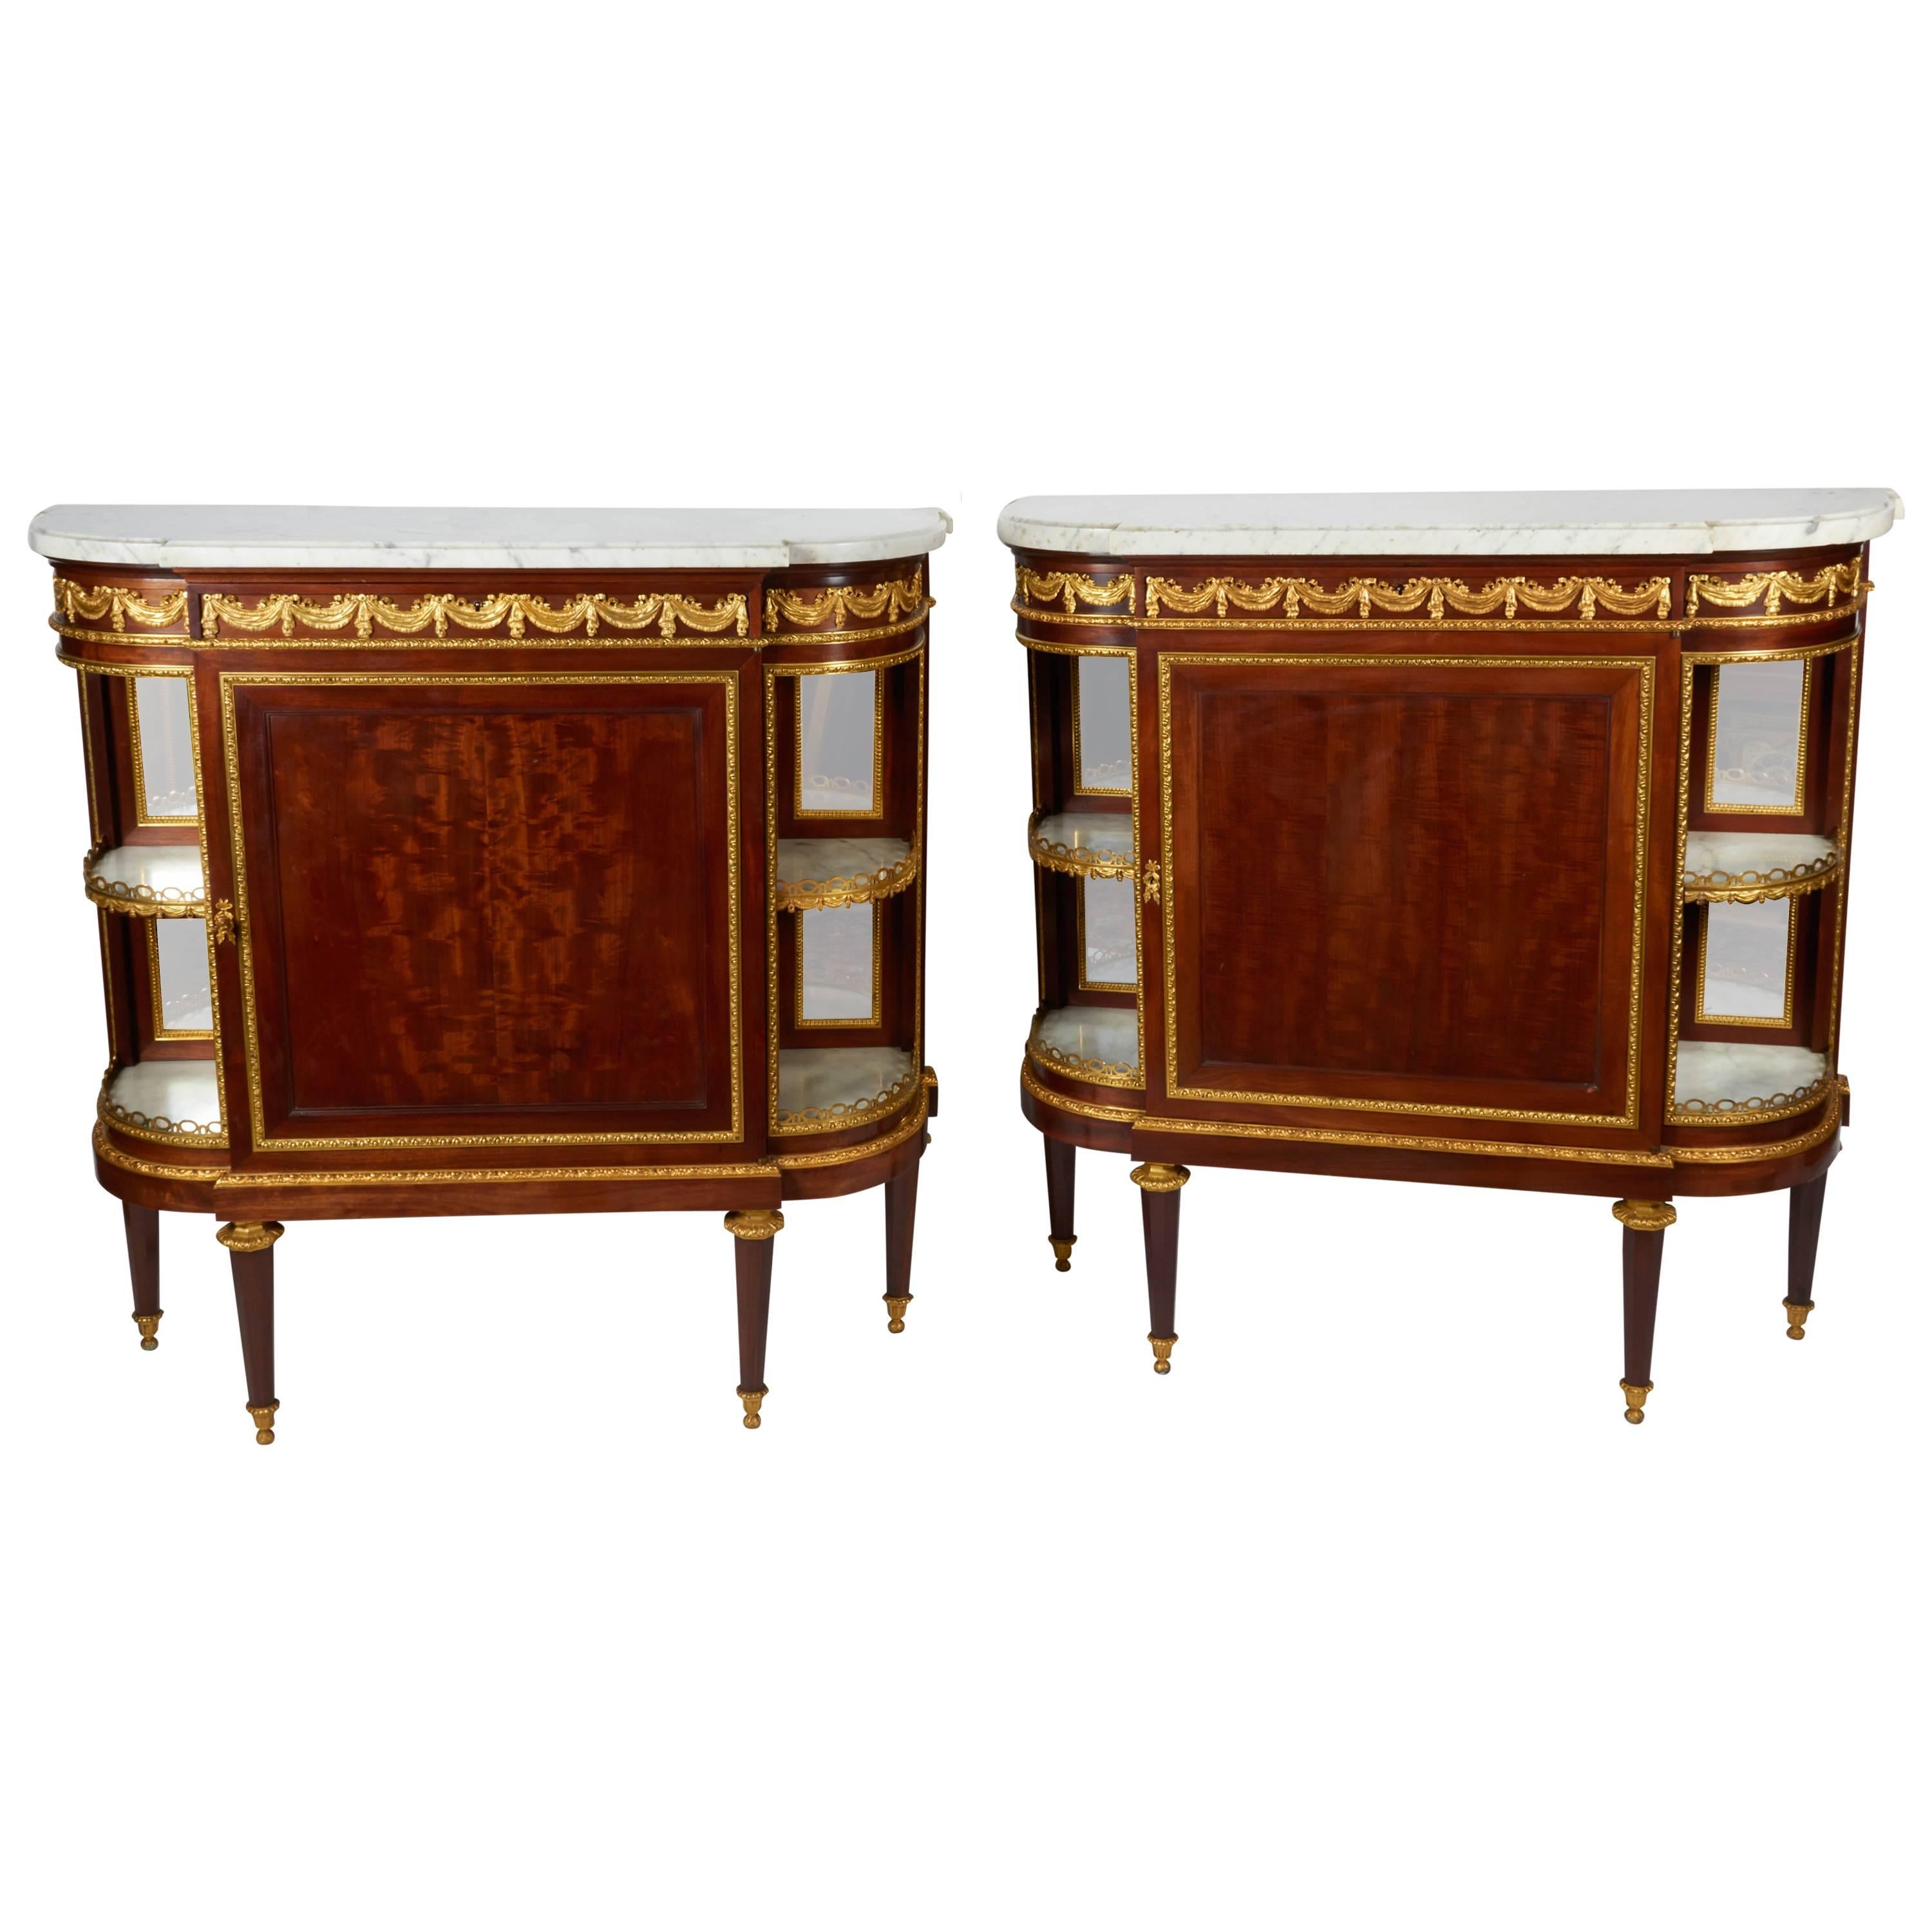 Fine Pair of French Louis XVI Style Side Cabinets or Vitrines, Attributed Dasson